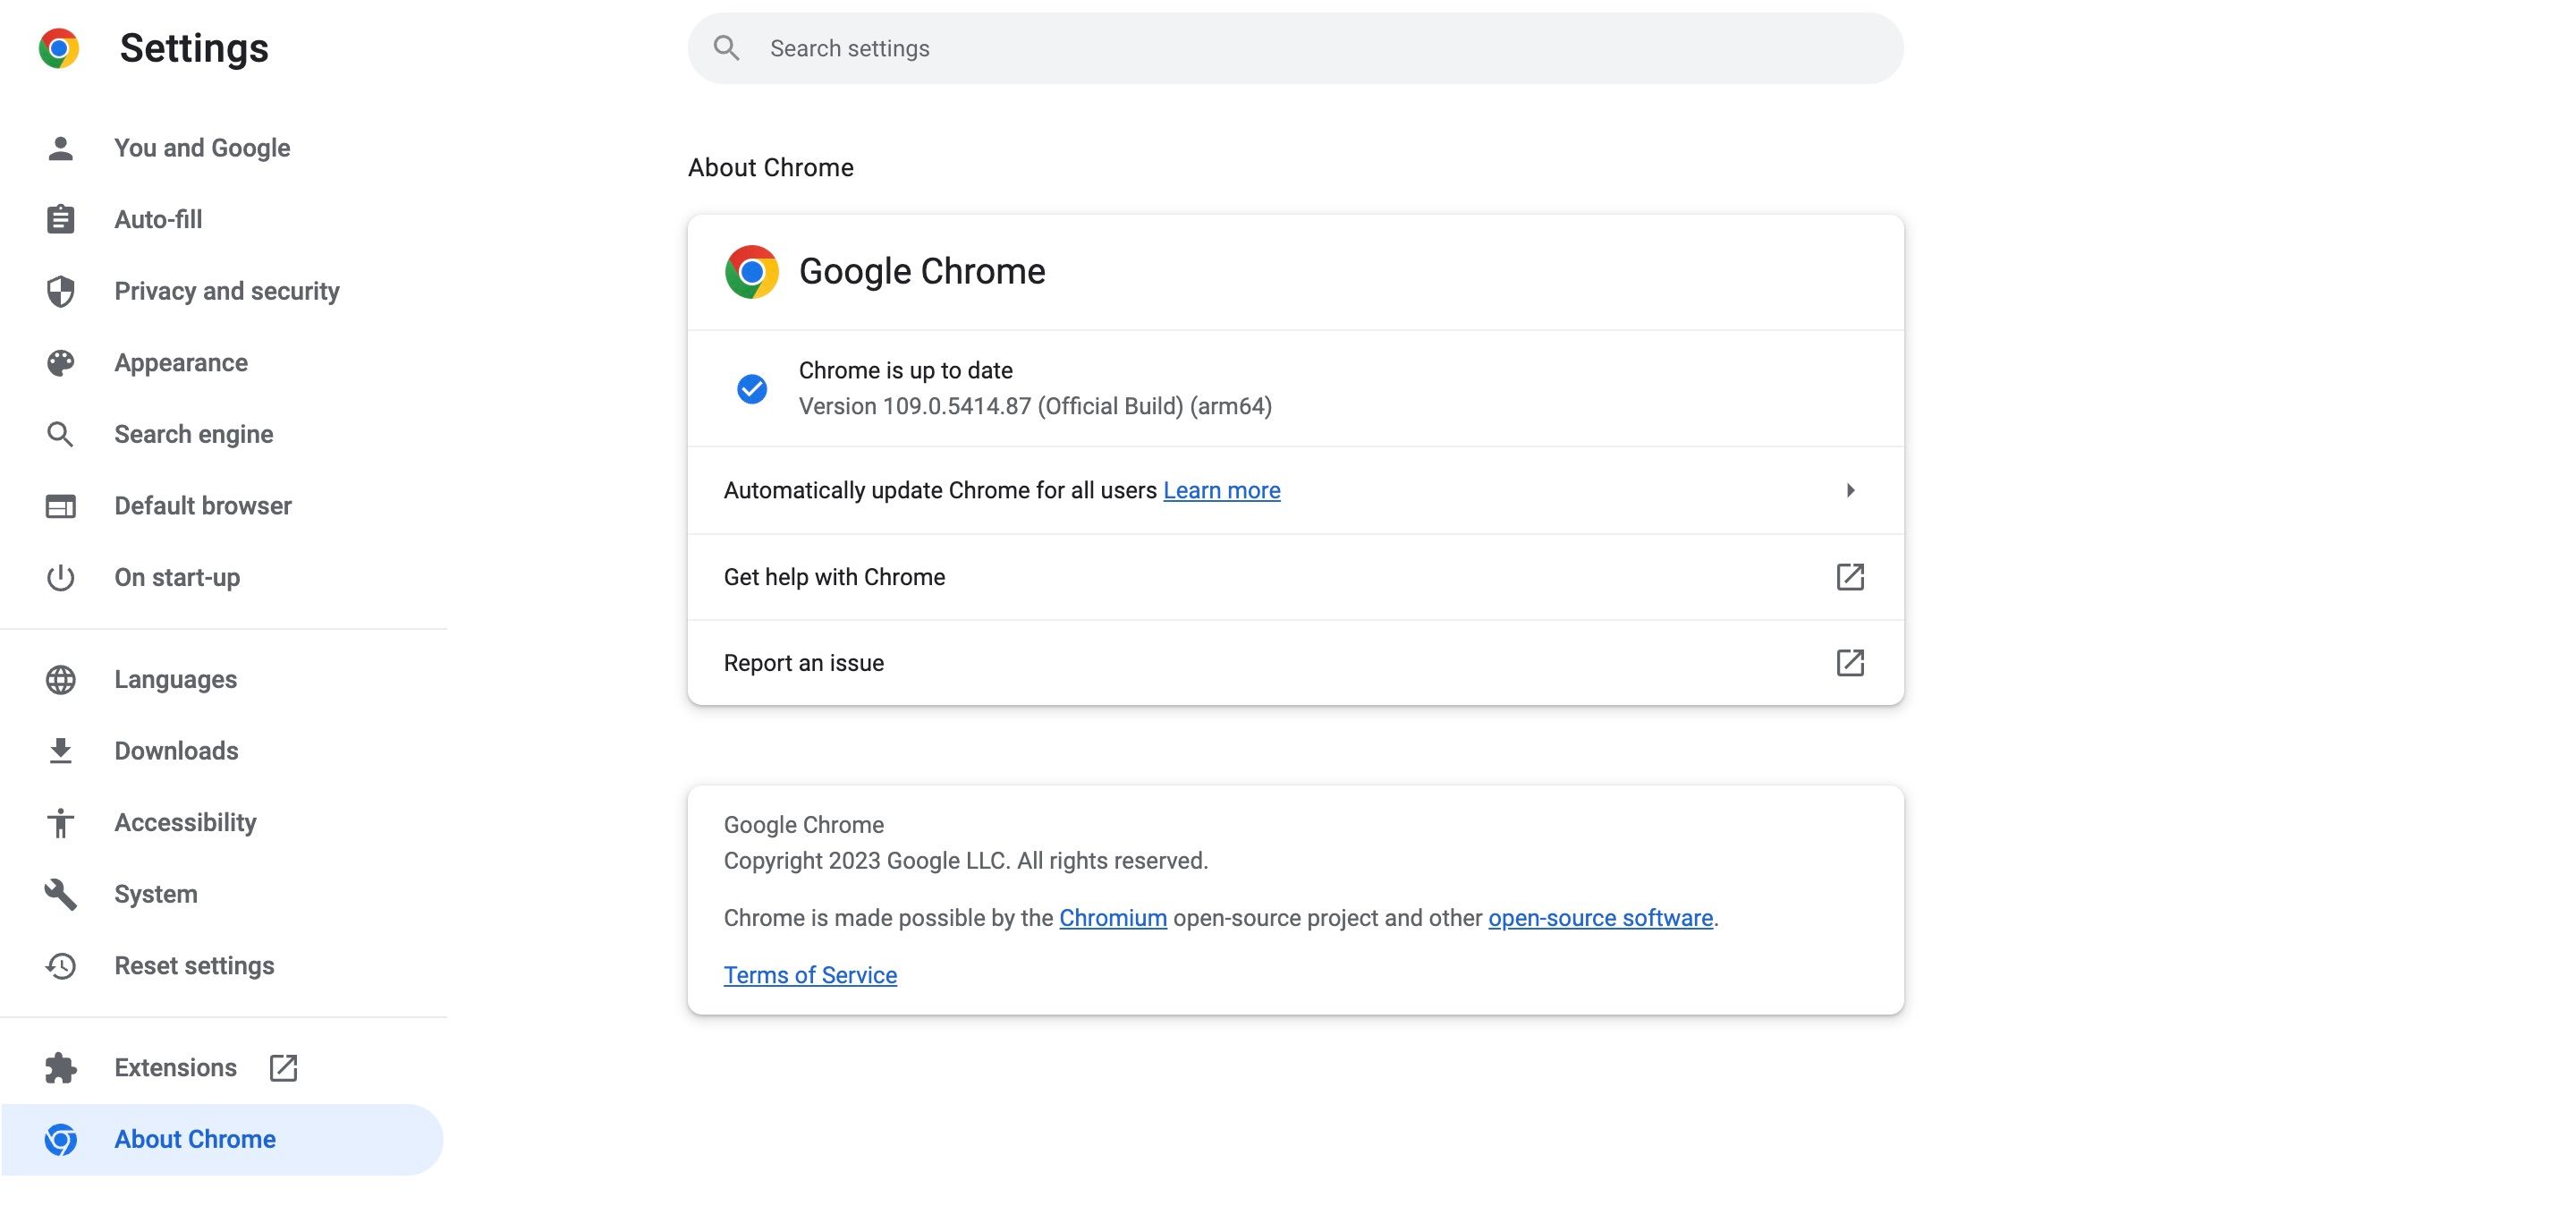 Screenshot of About Chrome showing Chrome update